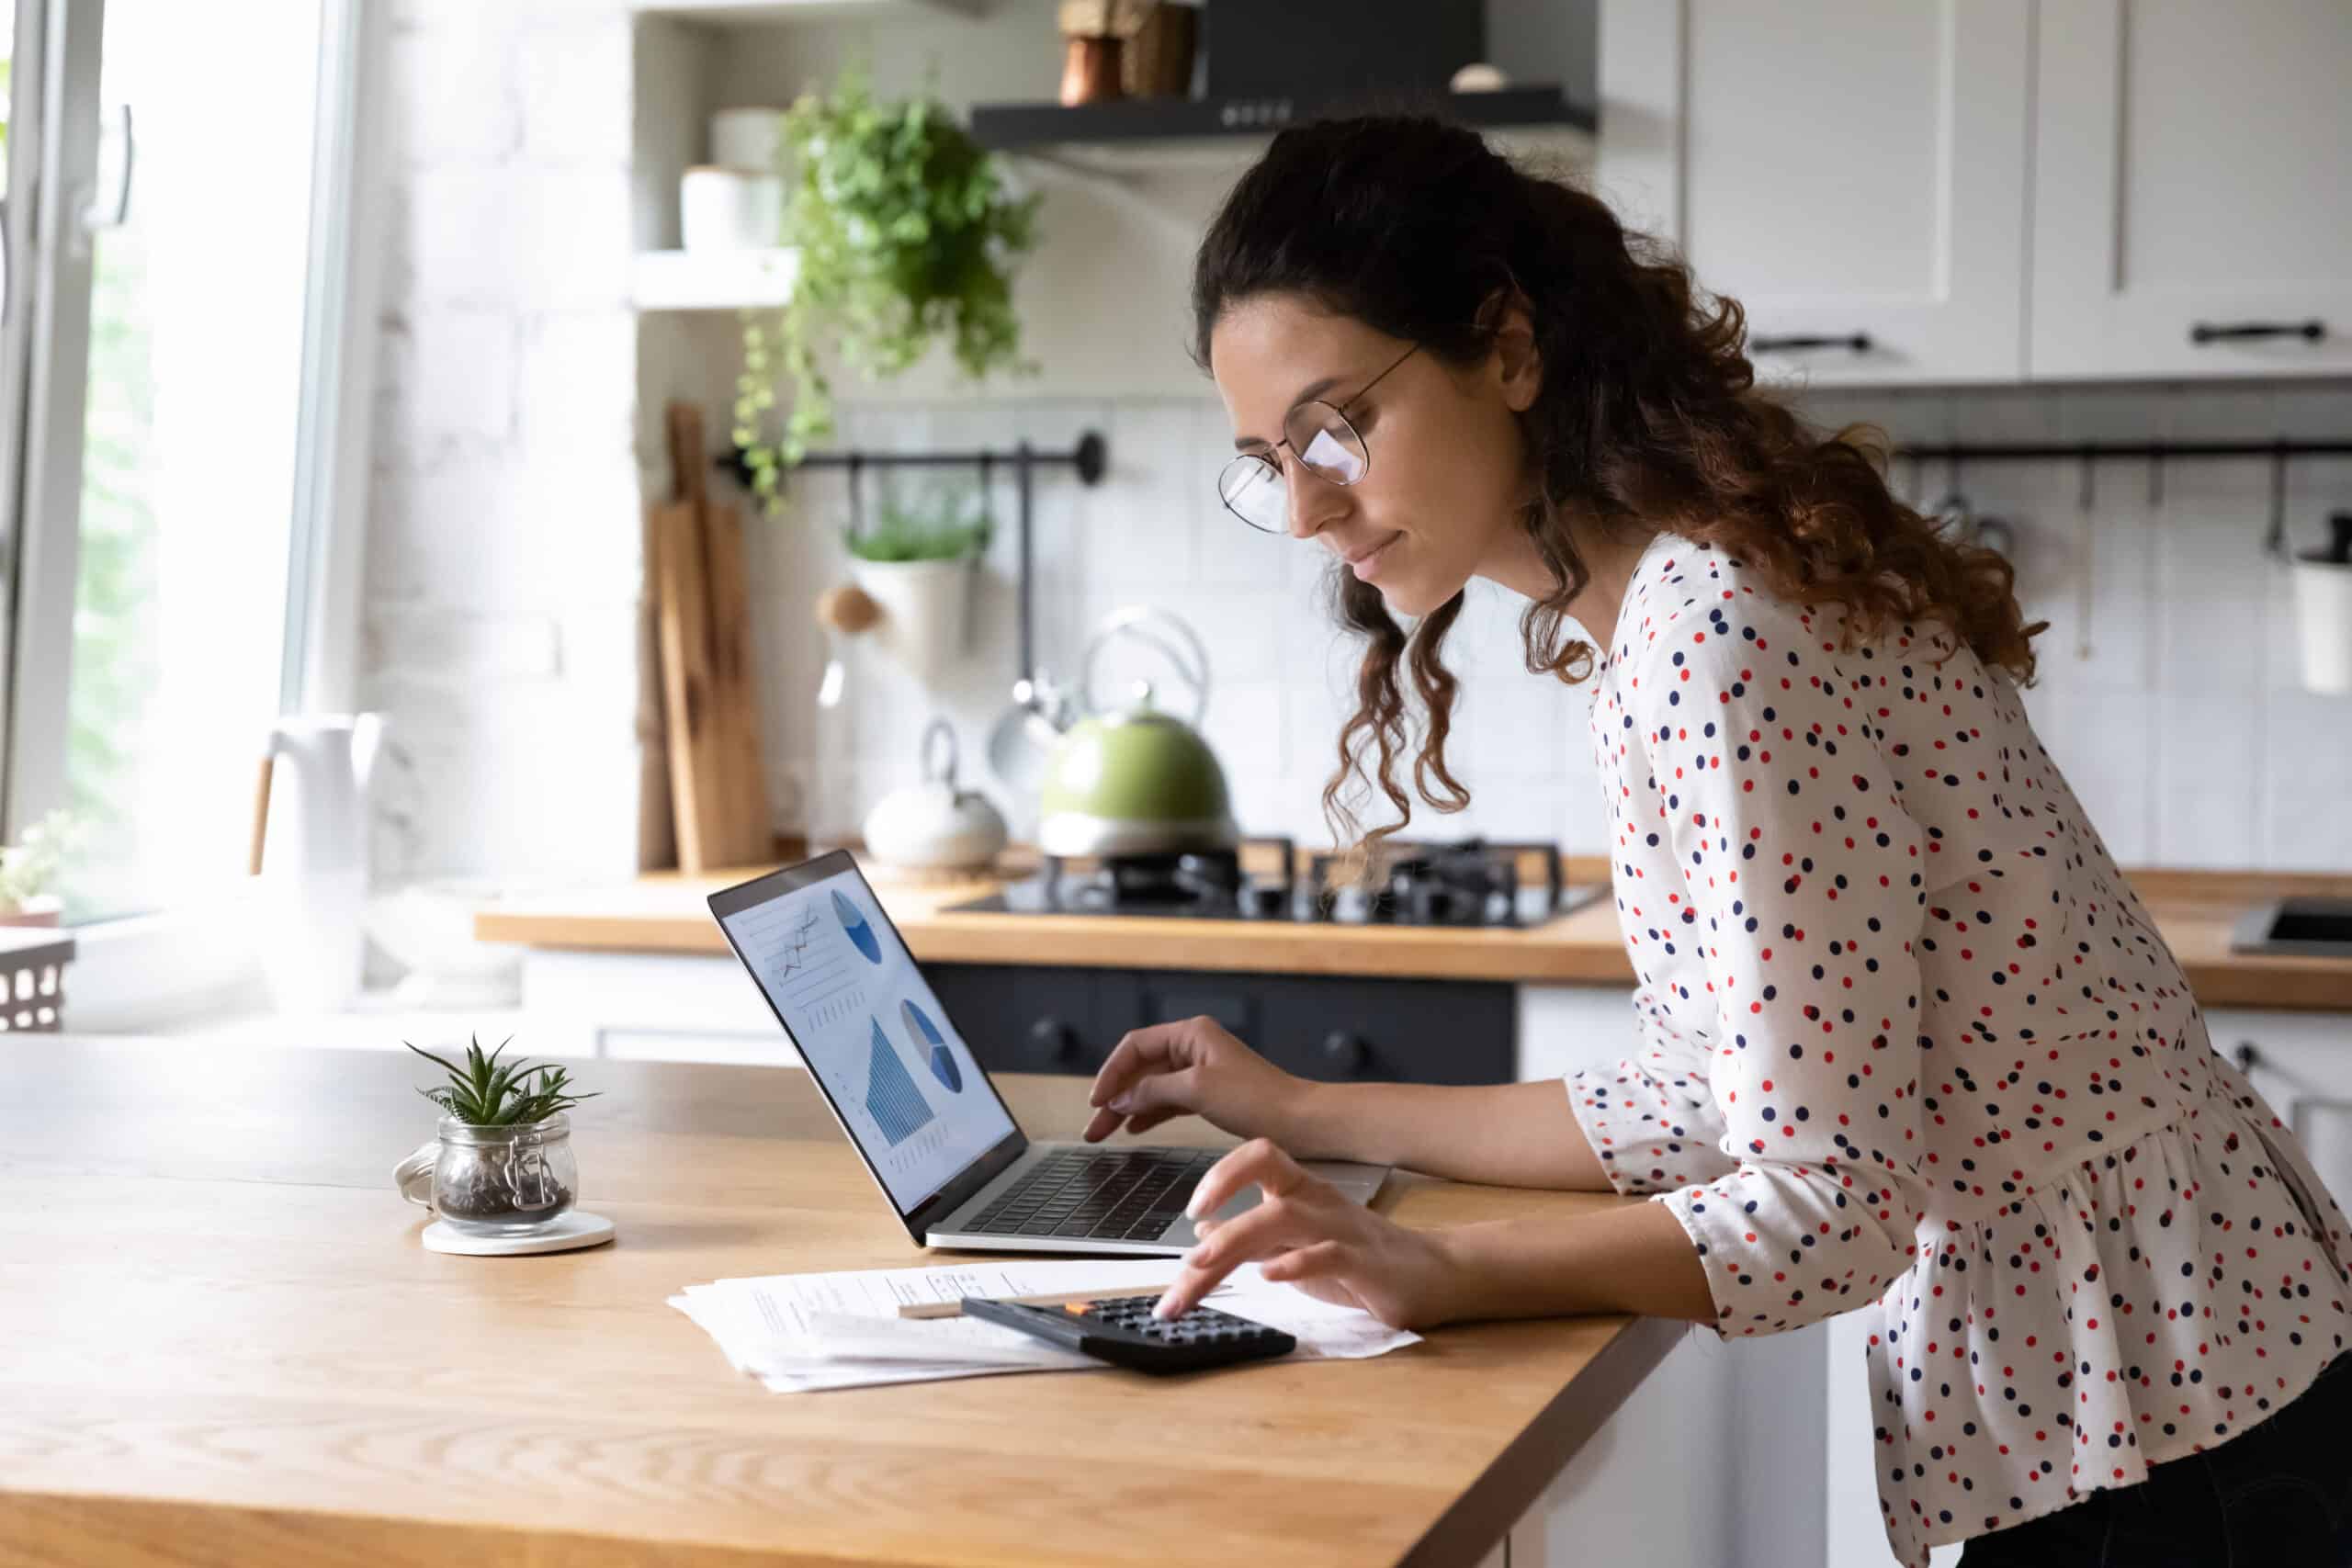 save or invest: Serious young woman wearing glasses calculating finances, household expenses, confident businesswoman working with project statistics, using laptop and calculator, standing in kitchen at home